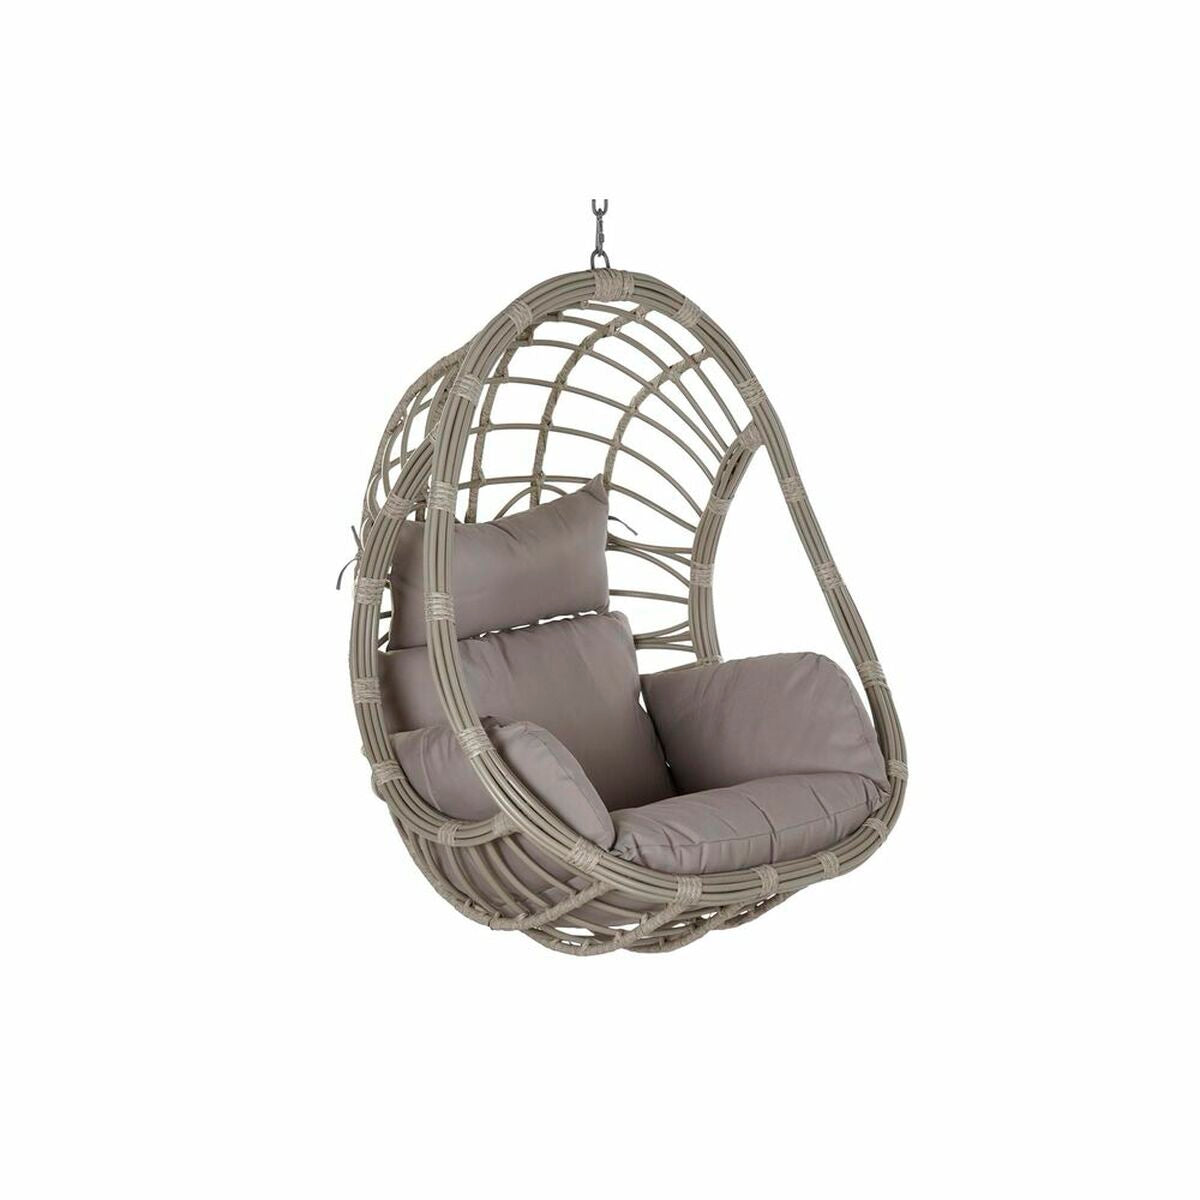 Hanging garden armchair DKD Home Decor 90 x 70 x 110 cm Grey synthetic